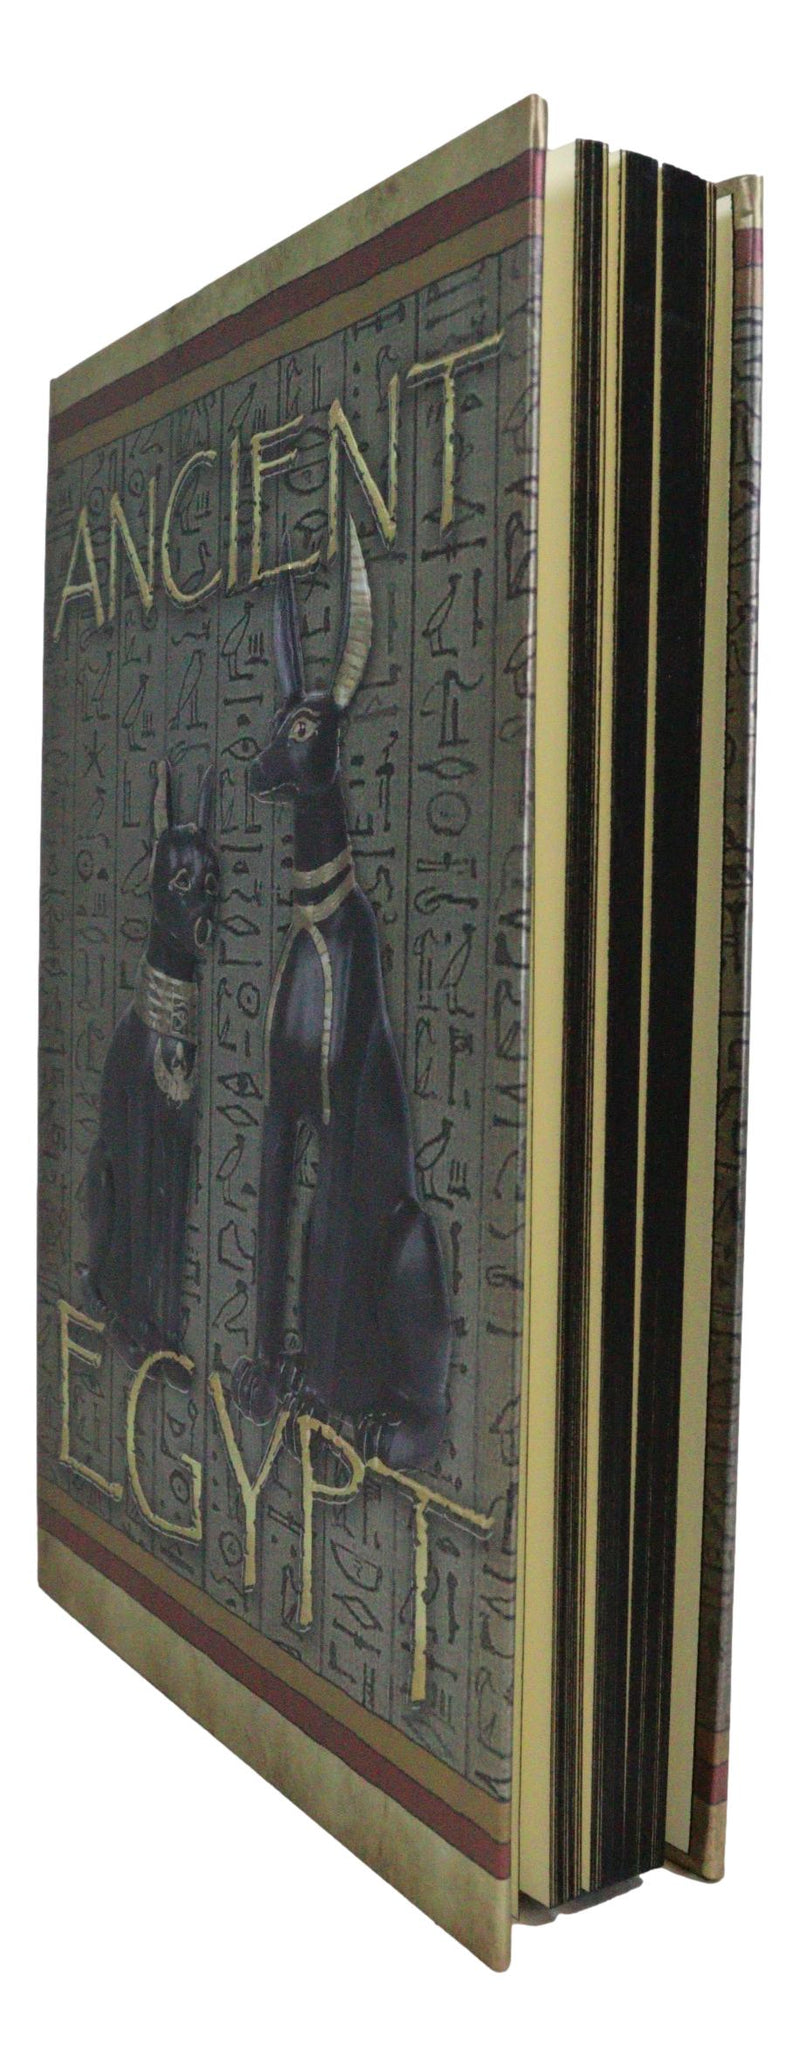 Ancient Egypt Bastet And Anubis Hieroglyphic Embossed Blank Page Journal Book